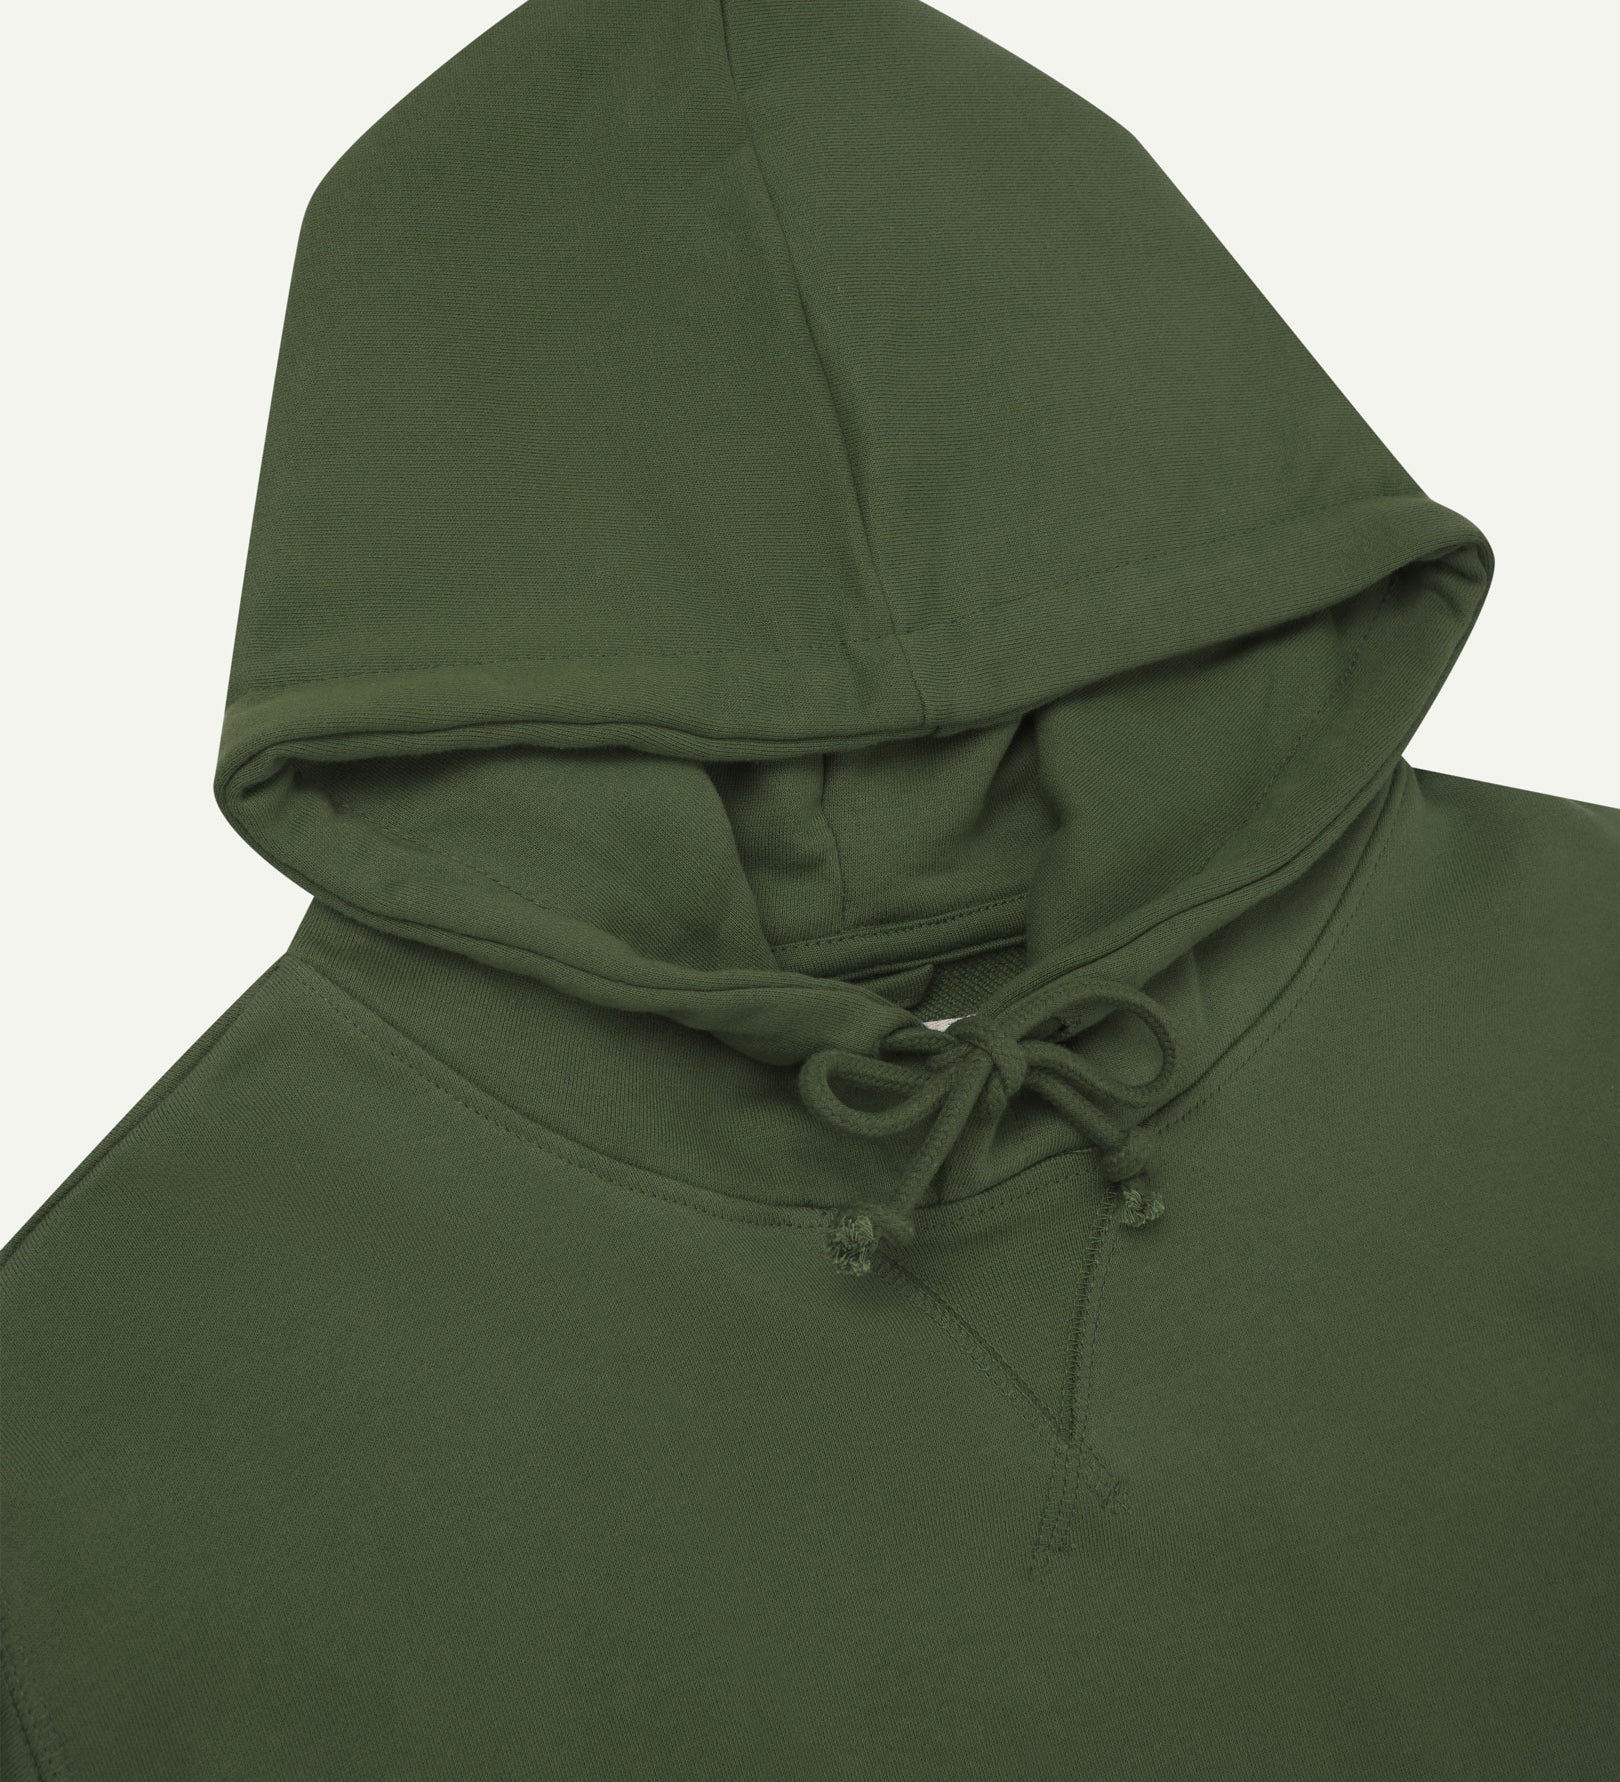 Front close-up view of Uskees coriander-green hoodie showing ties at neck and decorative V pattern.